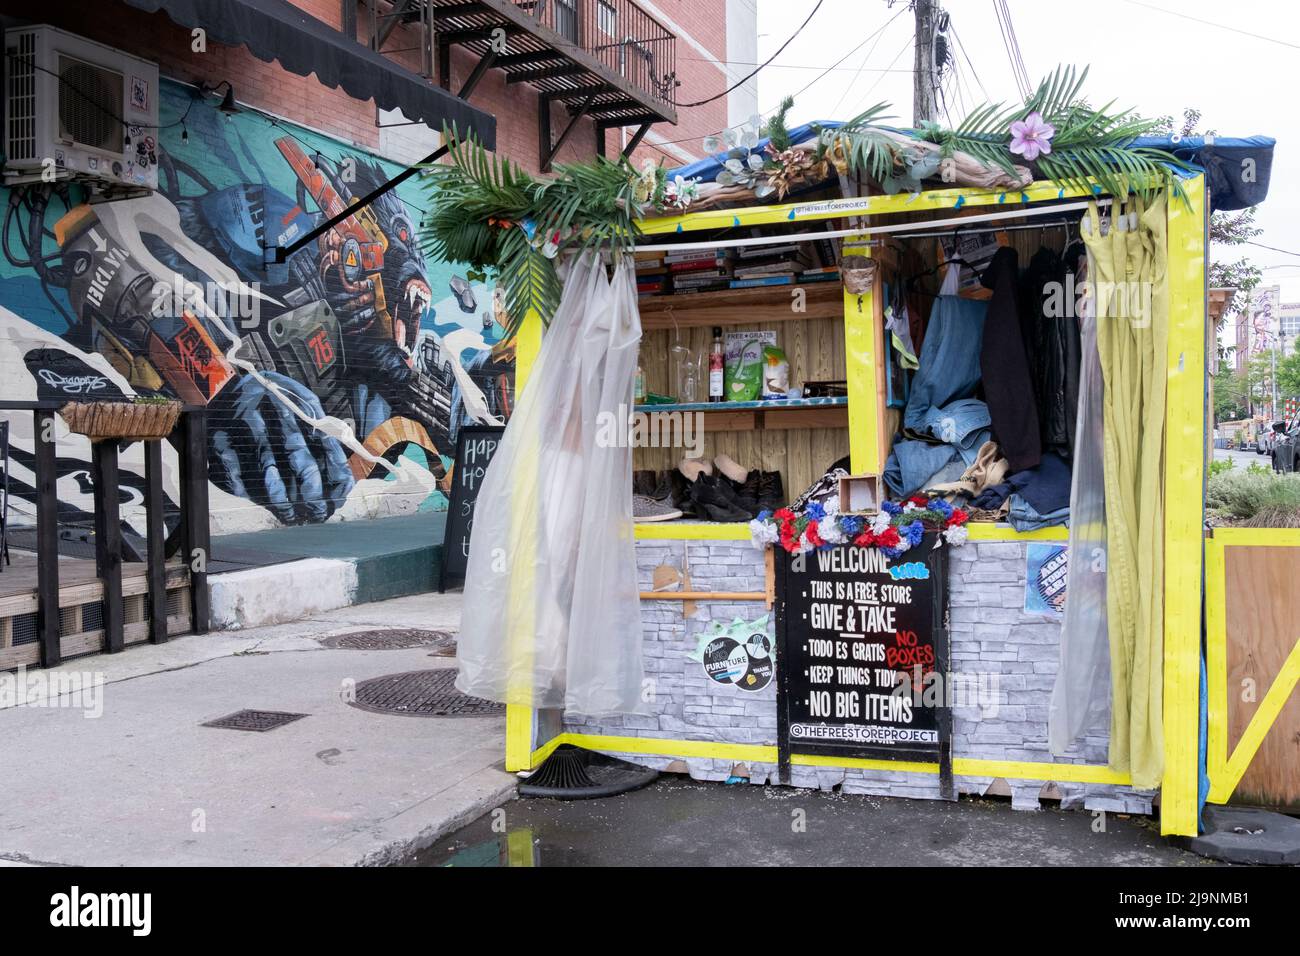 A Give & Take booth in Bushwick,  Brooklyn where clothing and household items are donated and given away for free. Stock Photo